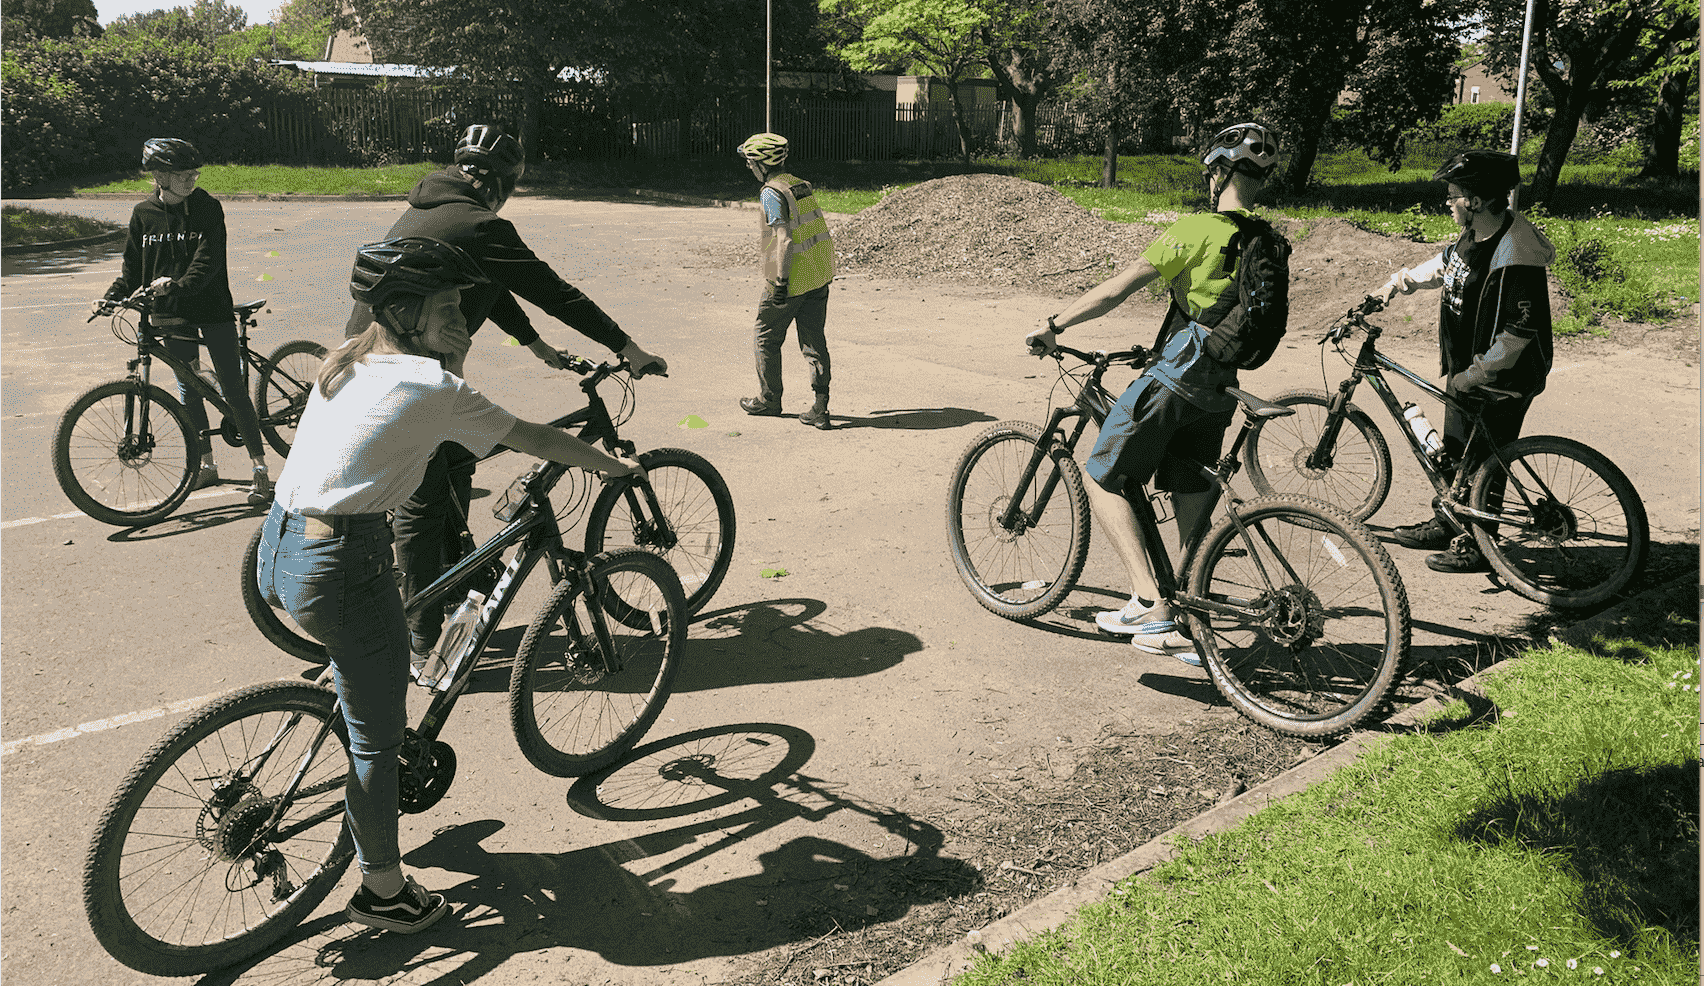 group of cyclists being taught some skills